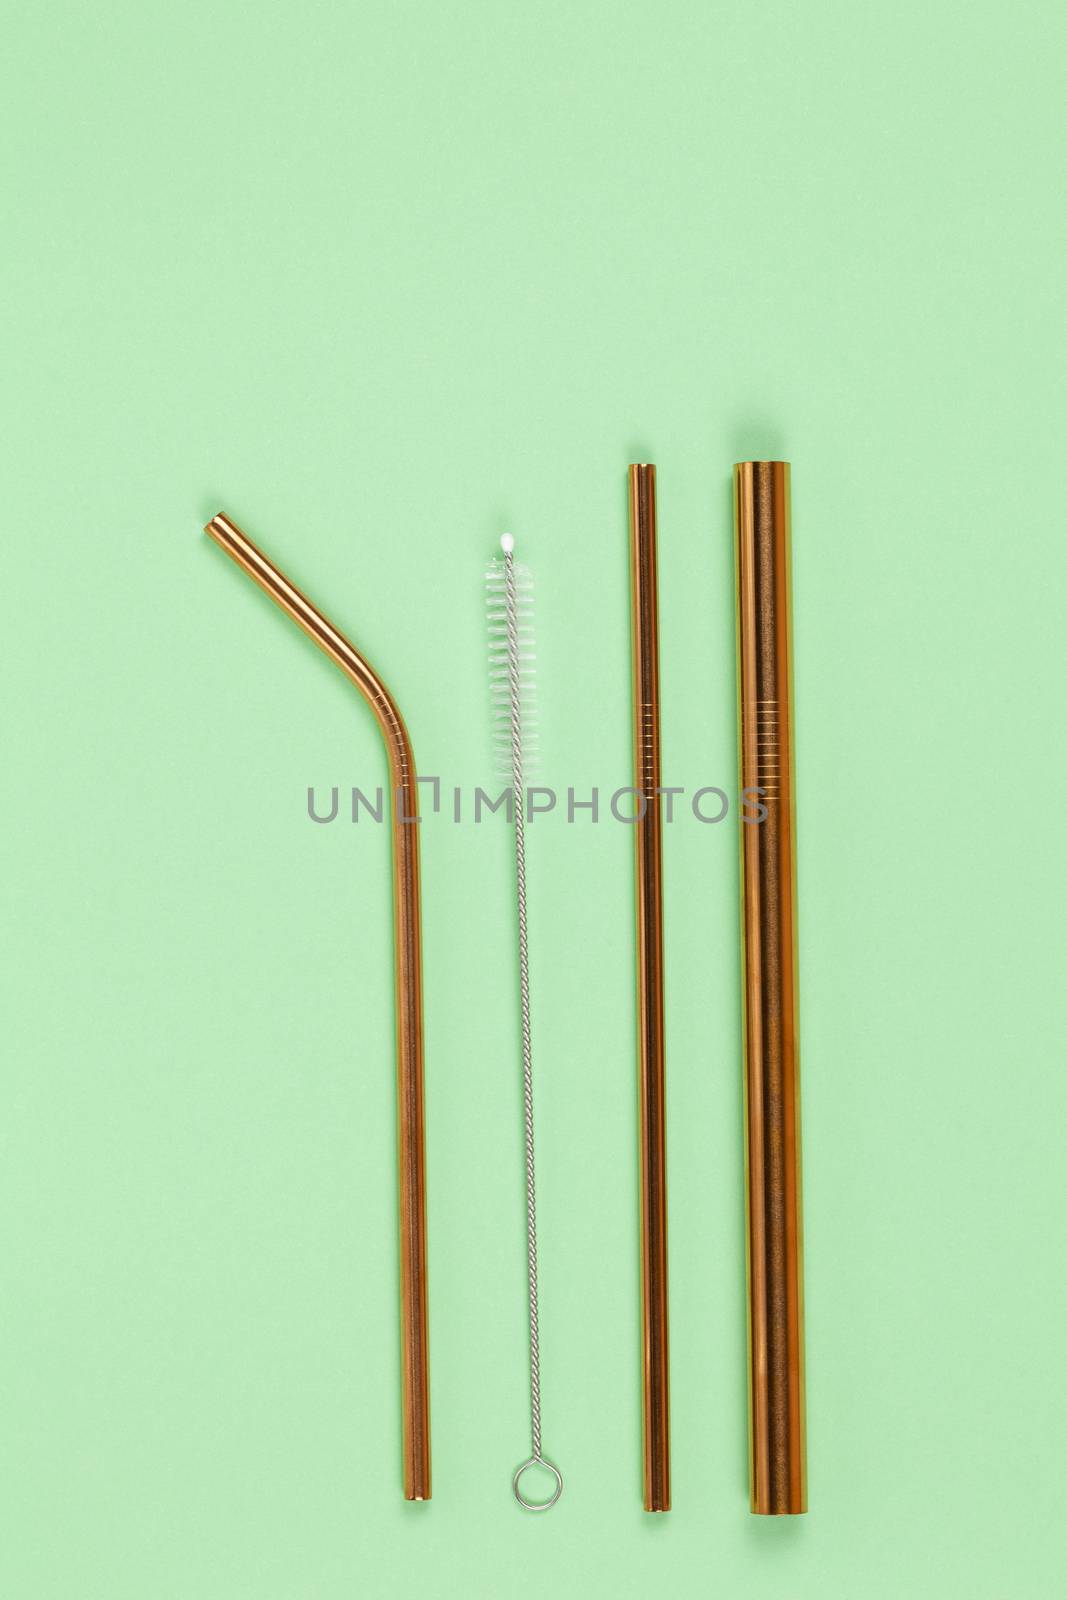 Tubes from environmental reusable metal opposition to plastic disposable tubes on green background. Alternative to disposable tableware, zero waste concept. Vertical. Flat lay, close-up, top veiw by ALLUNEED